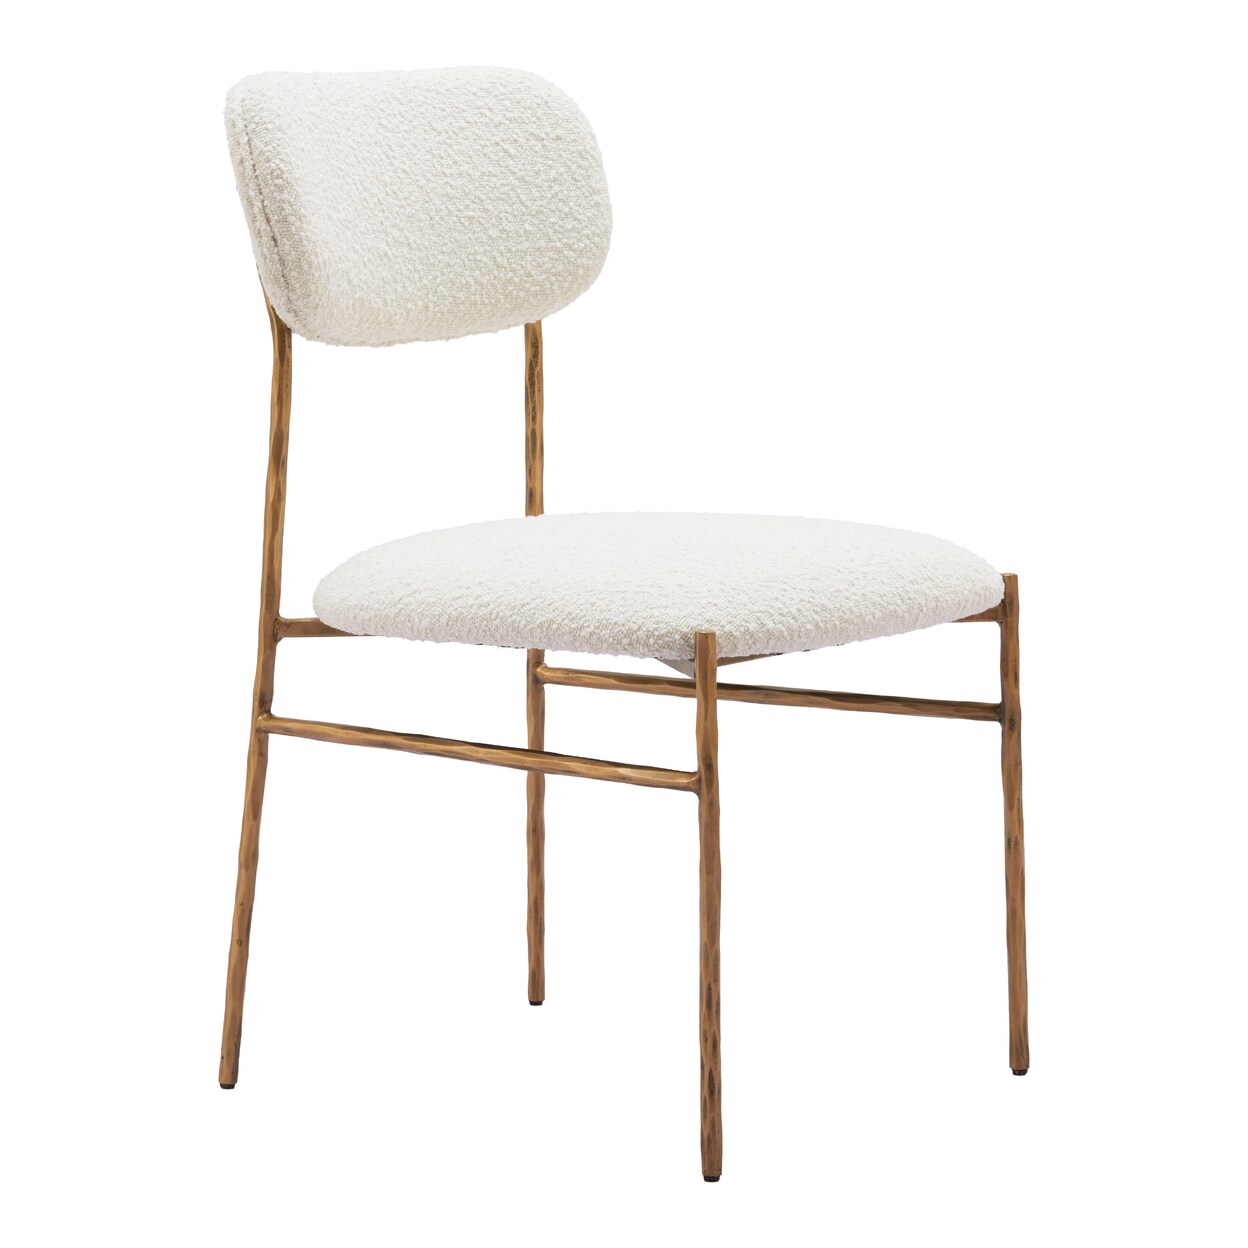 Zuo Modern Contemporary Inc. Sydhavnen Dining Chair Cream and Gold